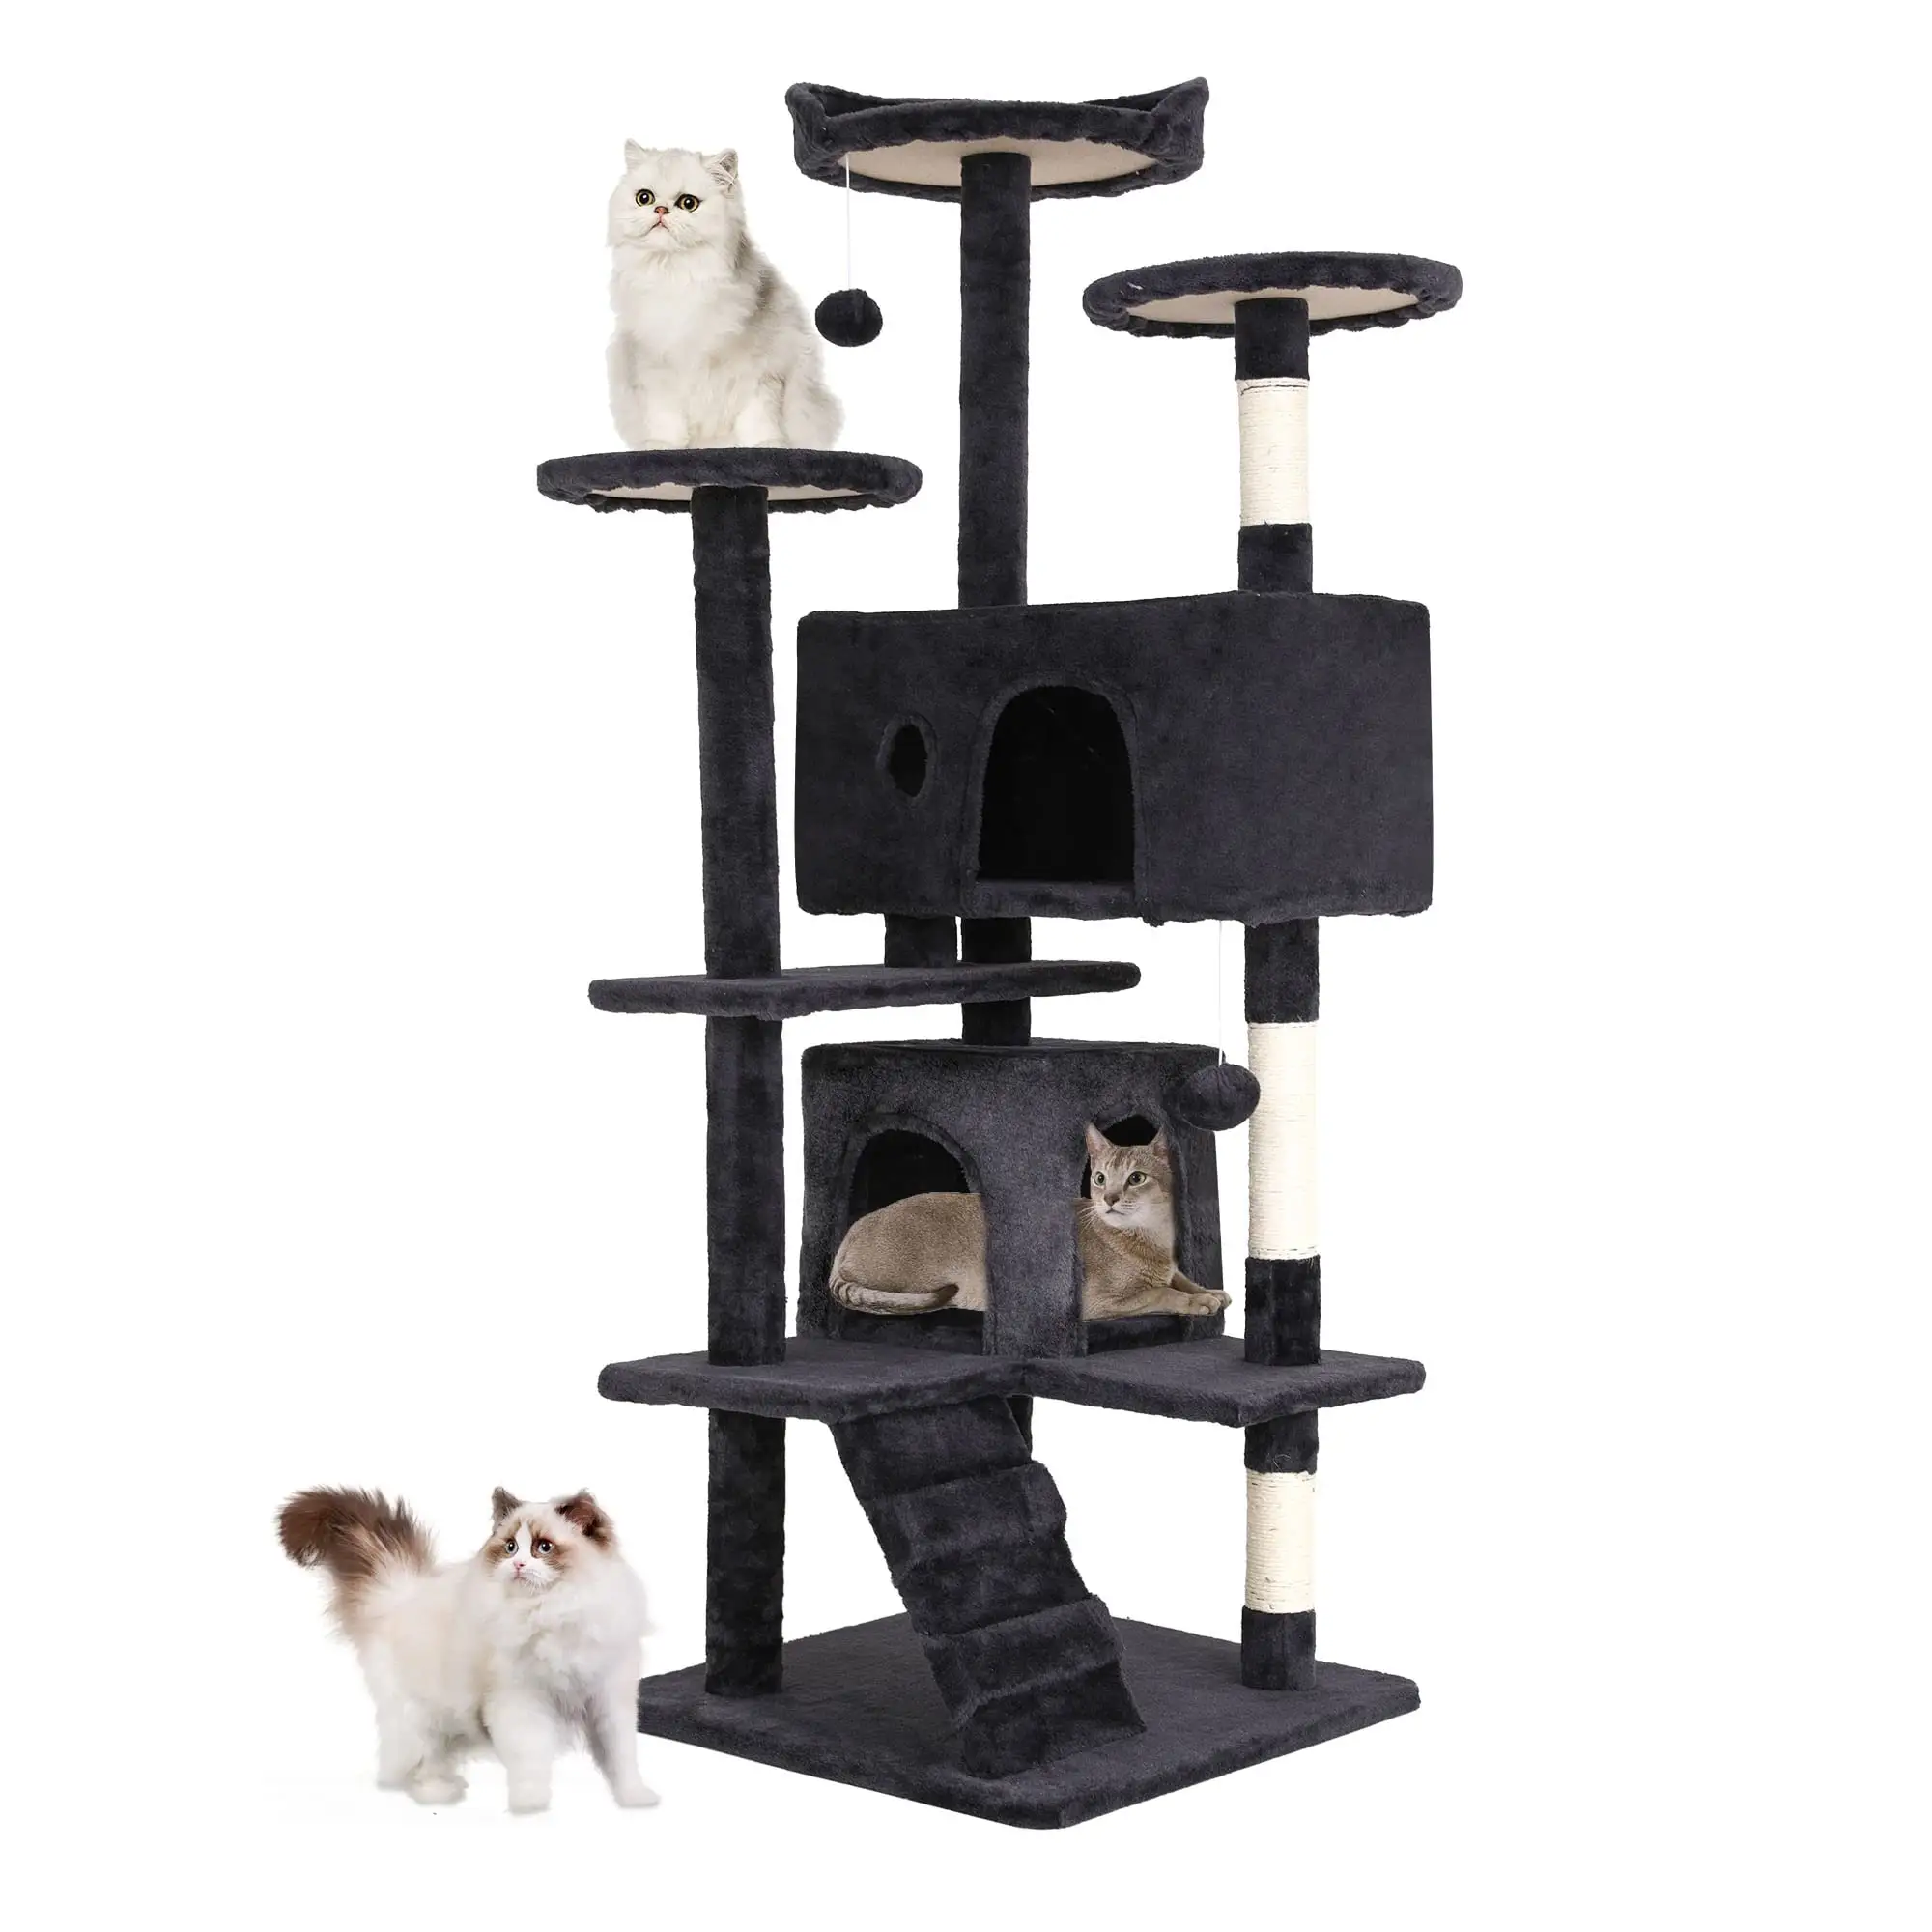 Multi-Level Furniture Activity Center House Condo Funny Toys Kittens Pet Play House Cat Tree Tower for Indoor Cats